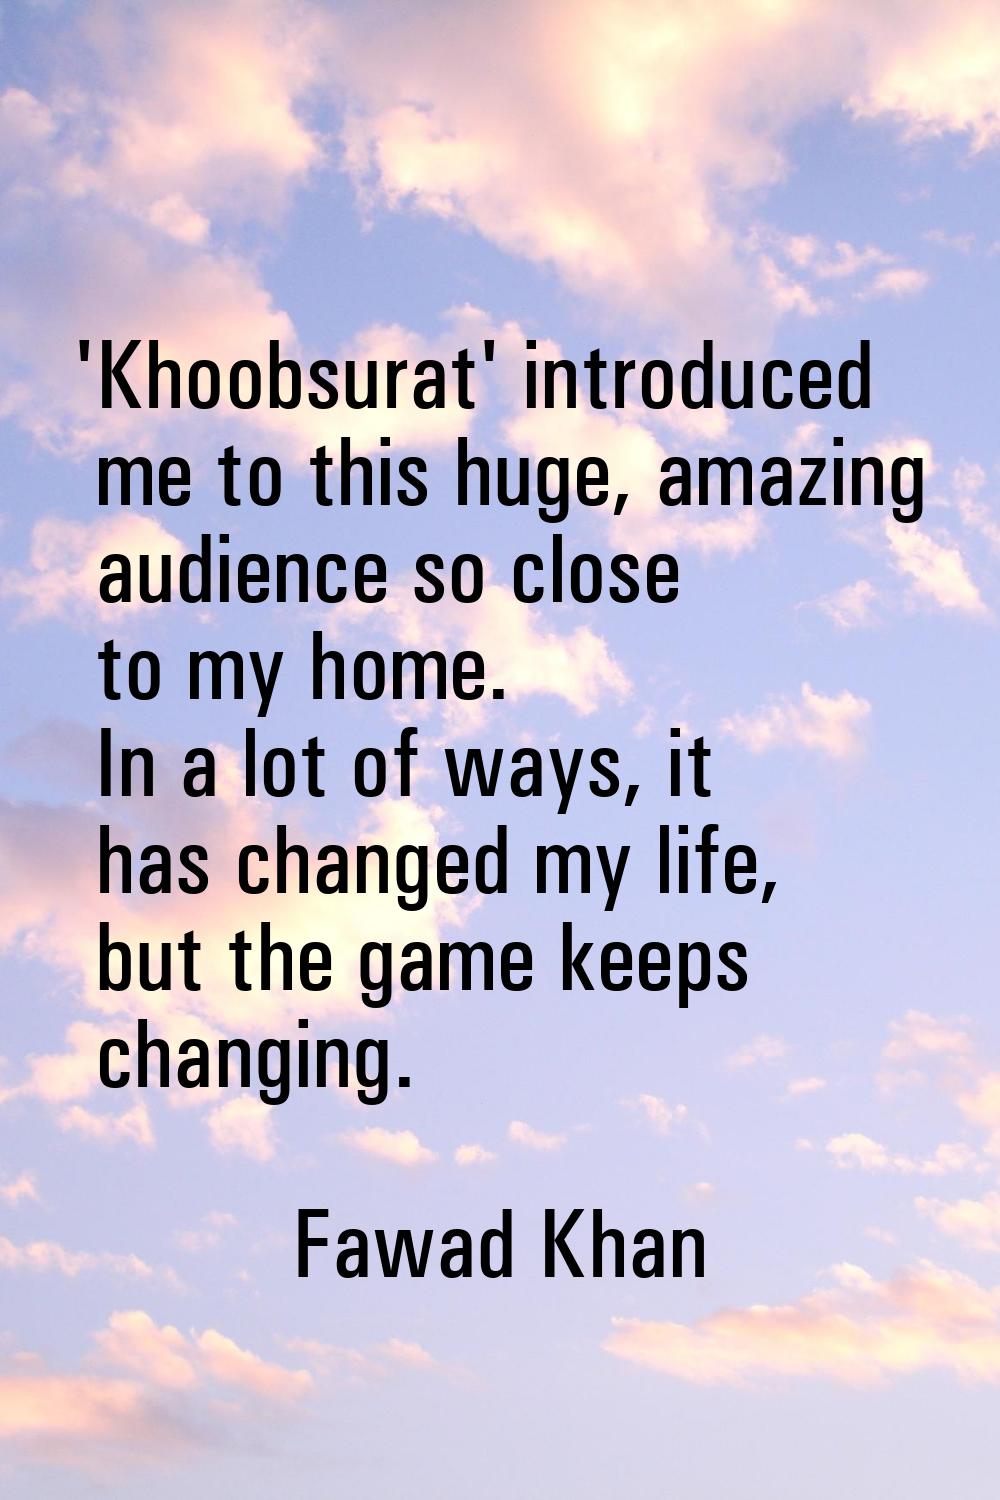 'Khoobsurat' introduced me to this huge, amazing audience so close to my home. In a lot of ways, it